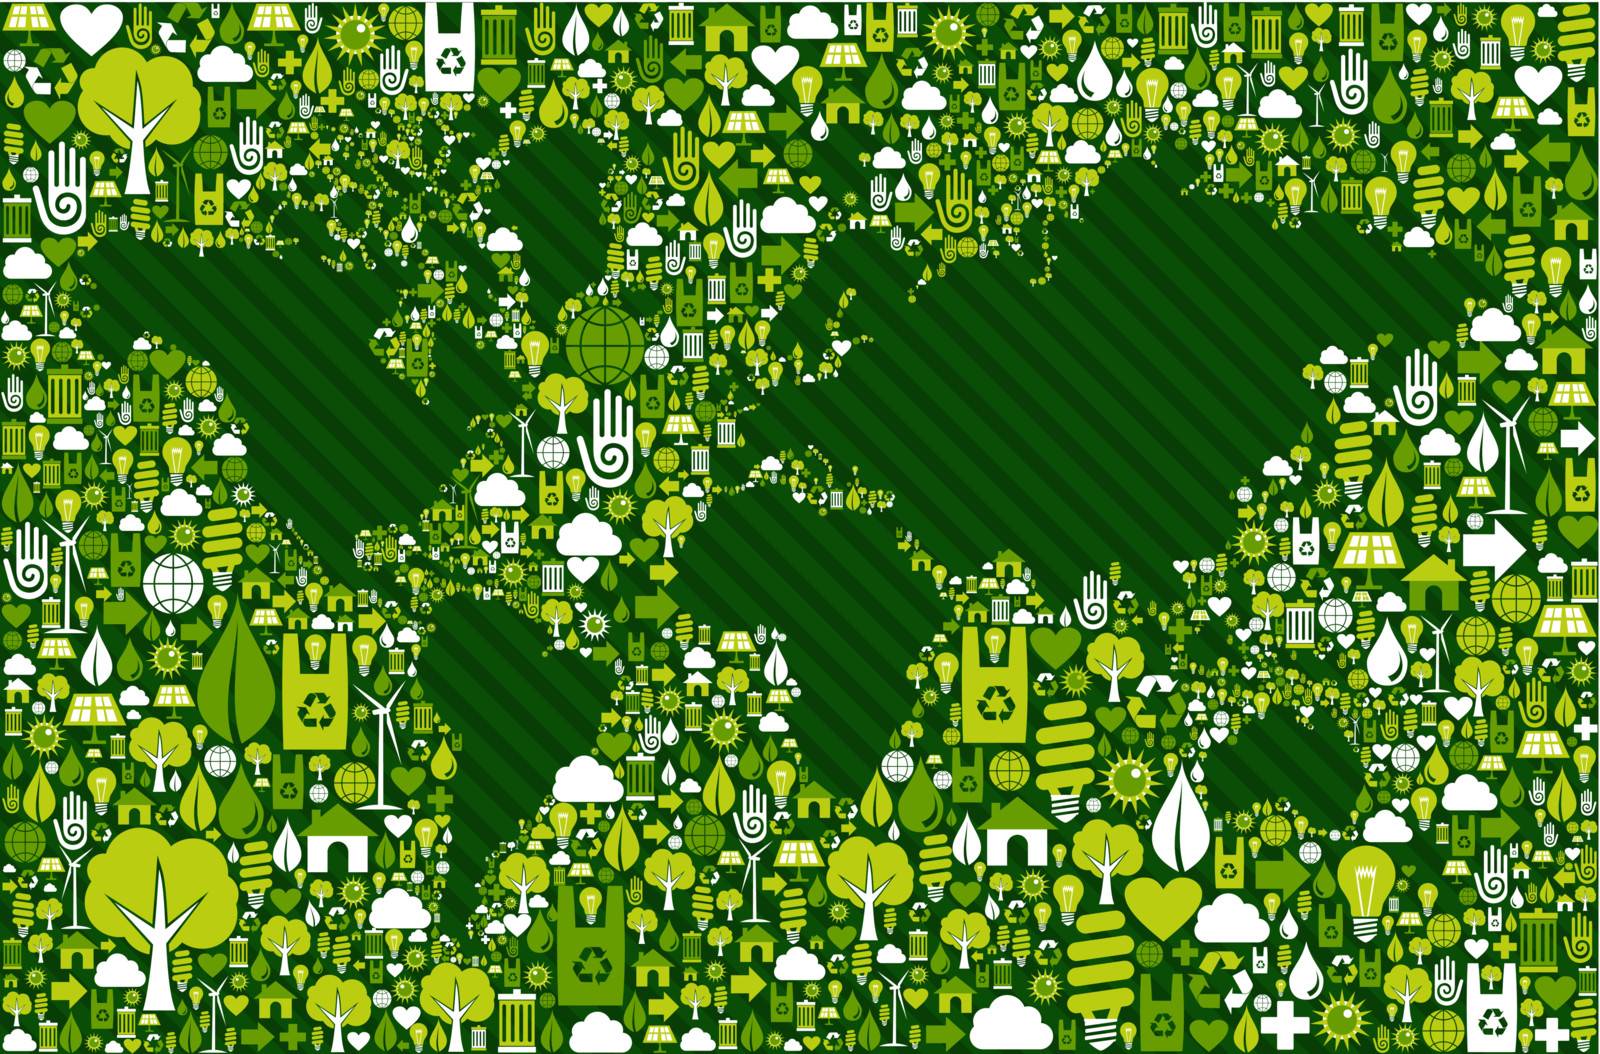 Green environment icon set around World map shape. Vector file layered for easy manipulation and custom coloring.